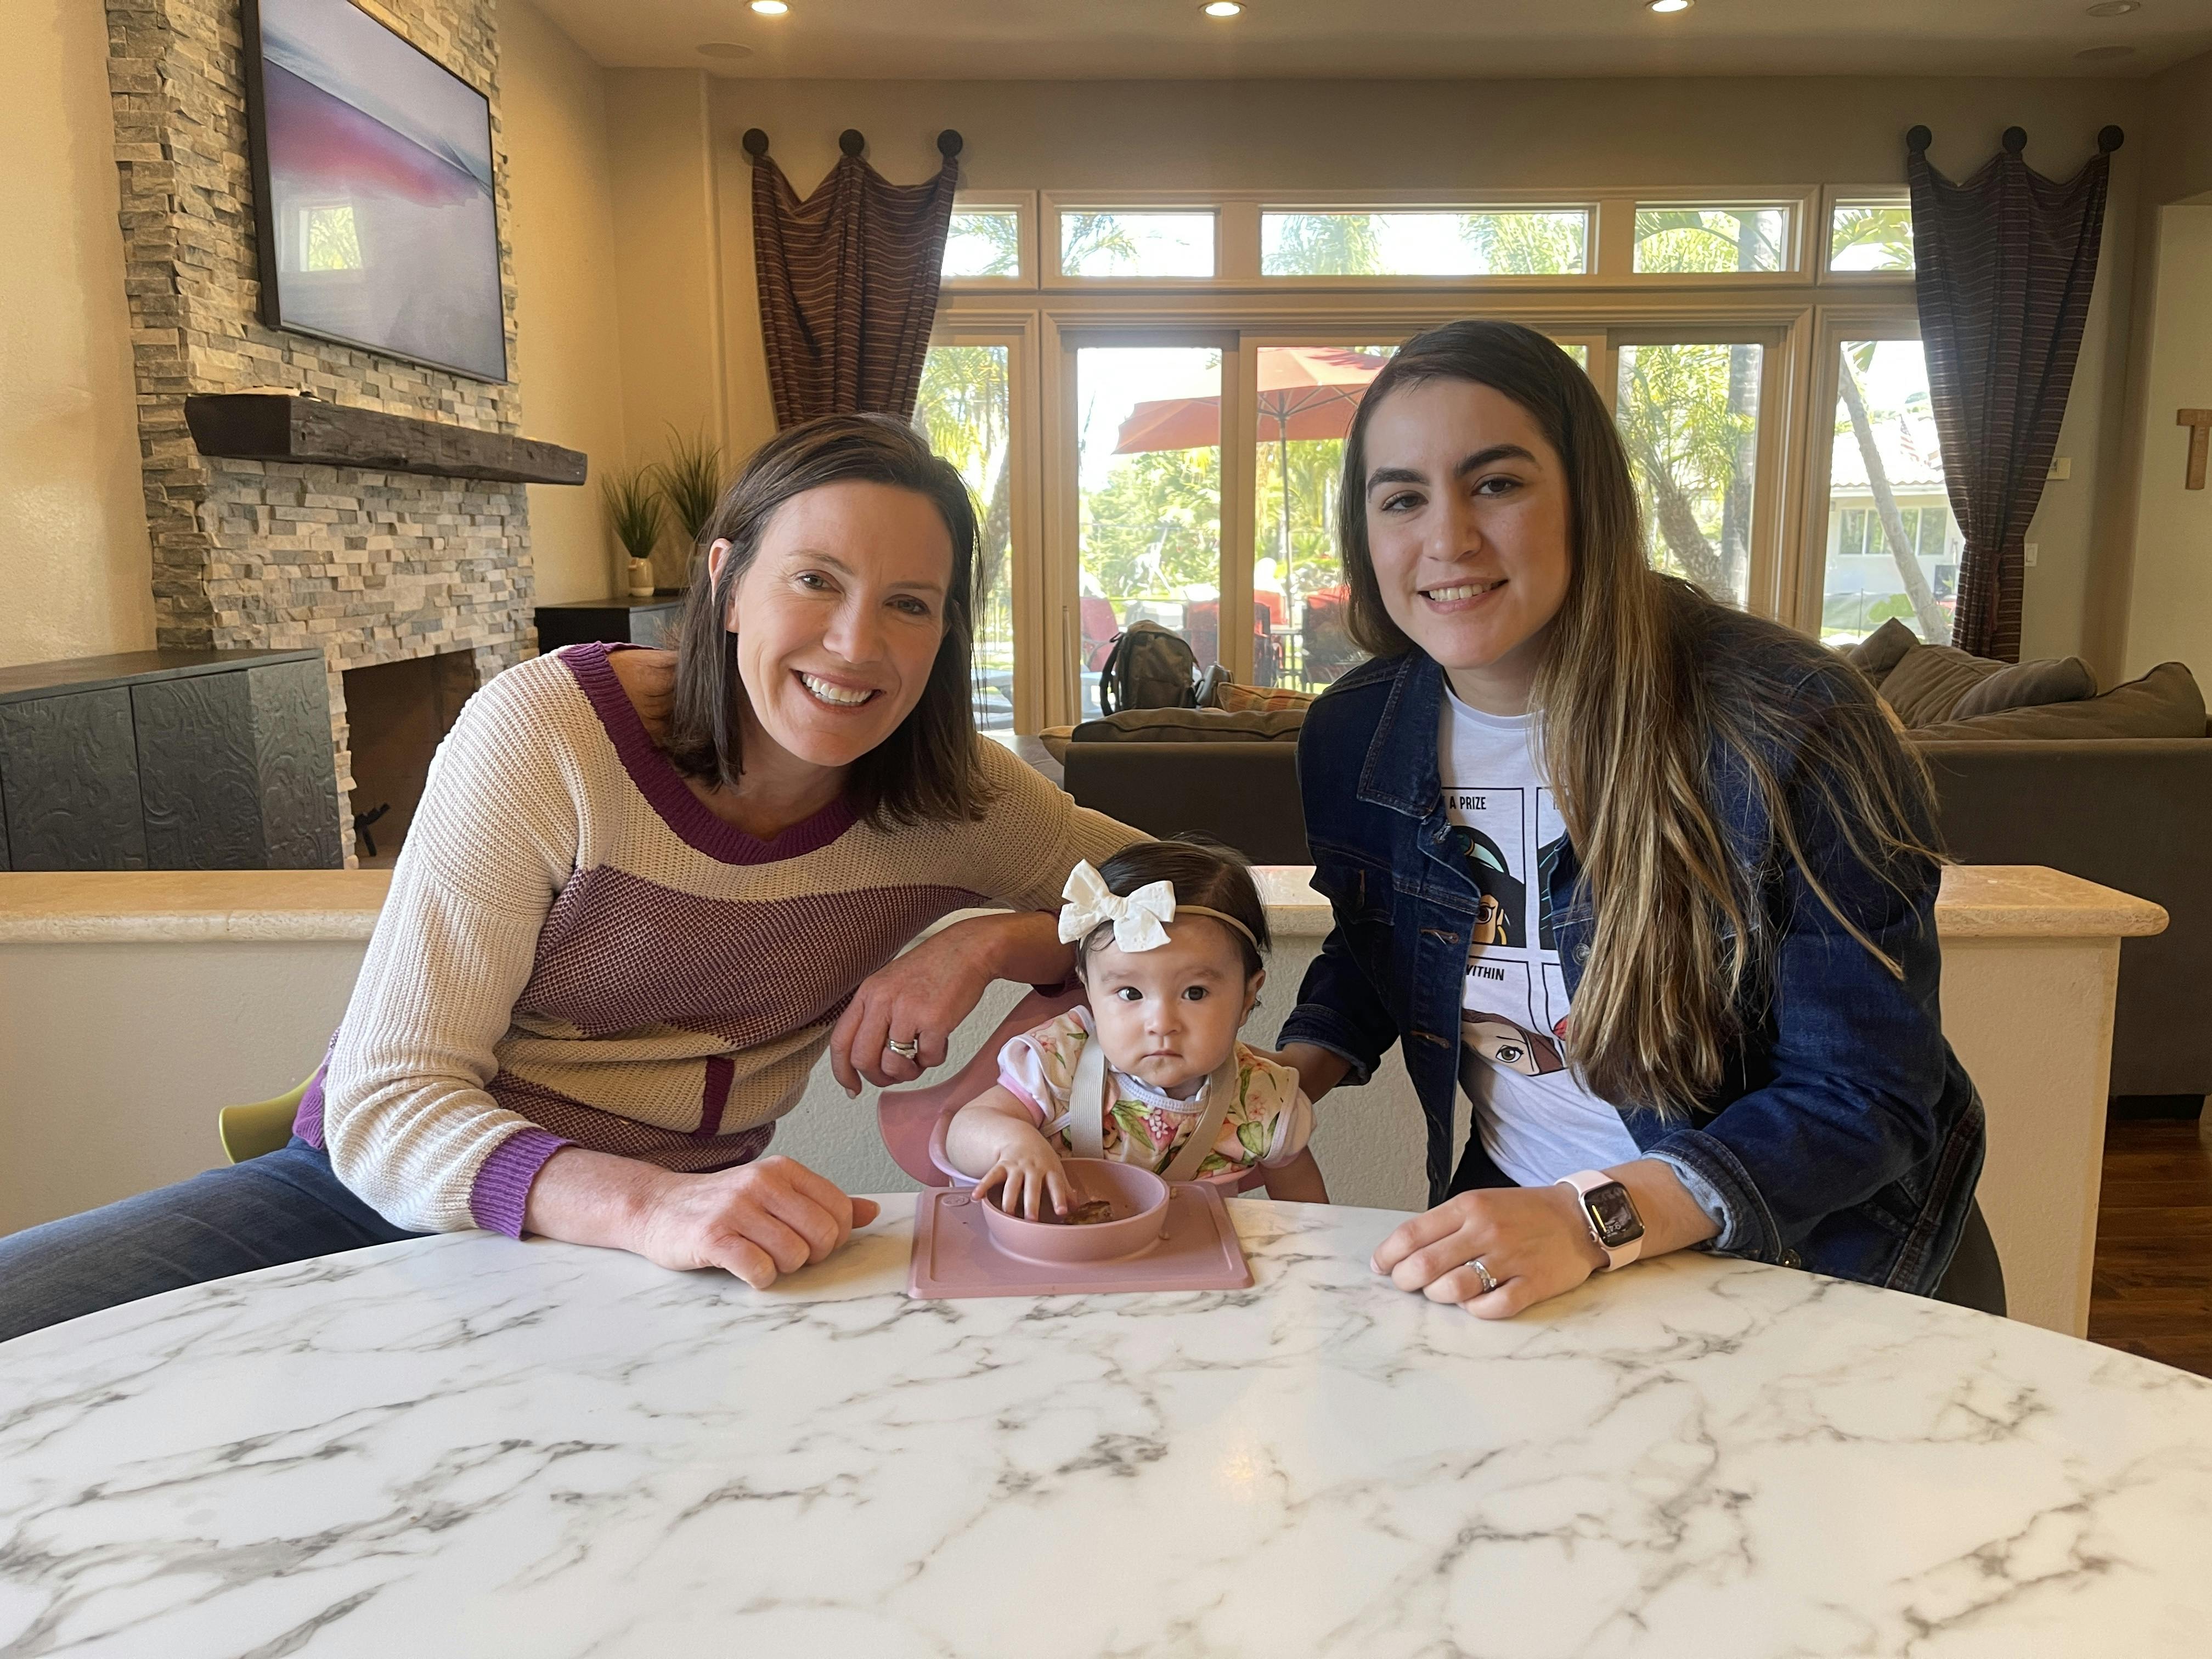 Dietitian Katie Ferraro, Alma and mom sitting at table with baby sitting in high chair and suction bowl of food in front of her